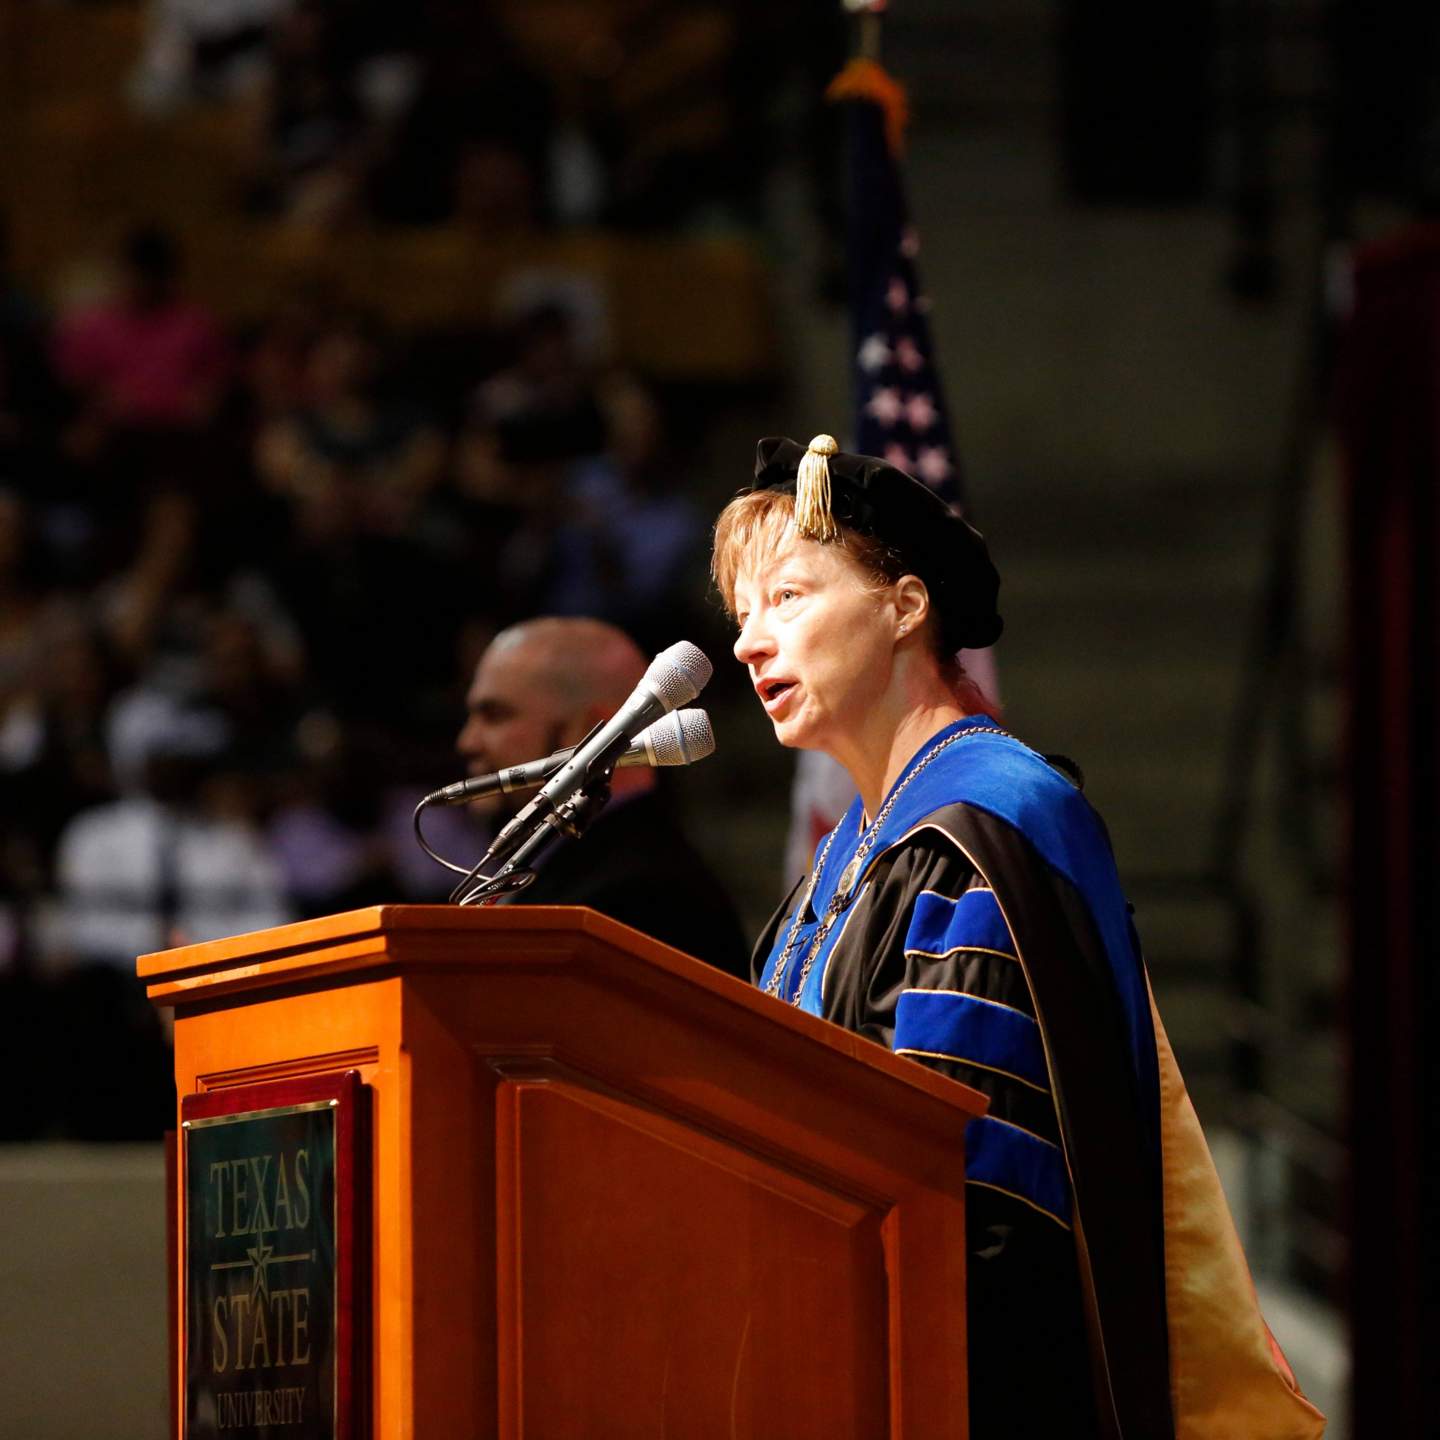 Remarks by President Trauth 